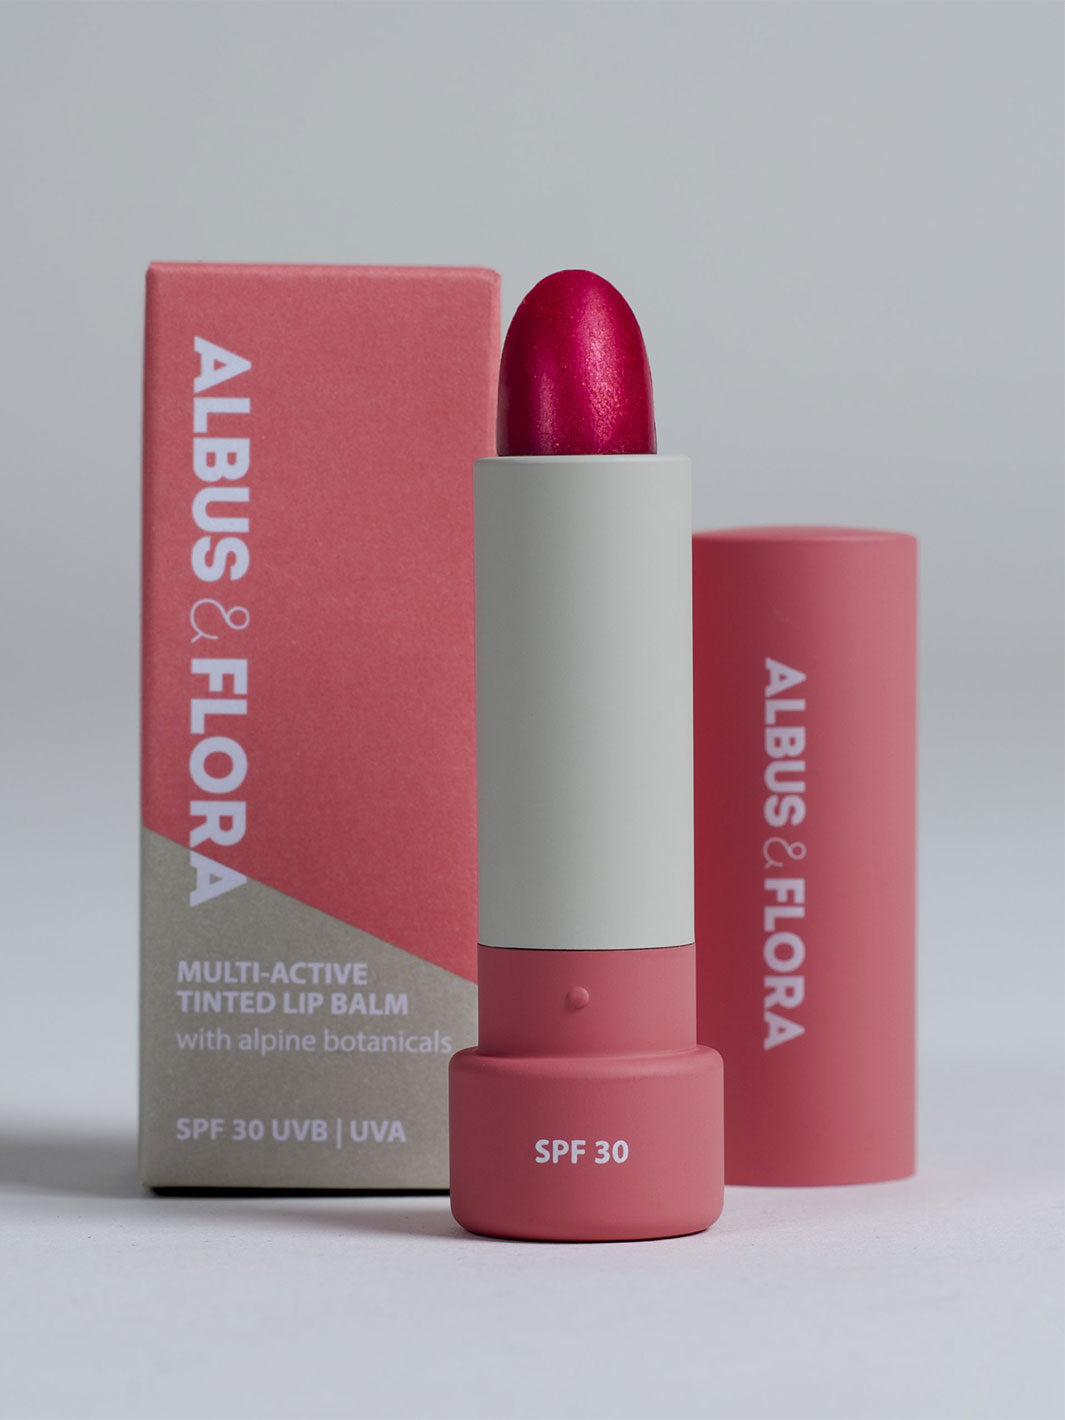 Albus & Flora Sheer Lip Balm in Snowberry Red from Winternational